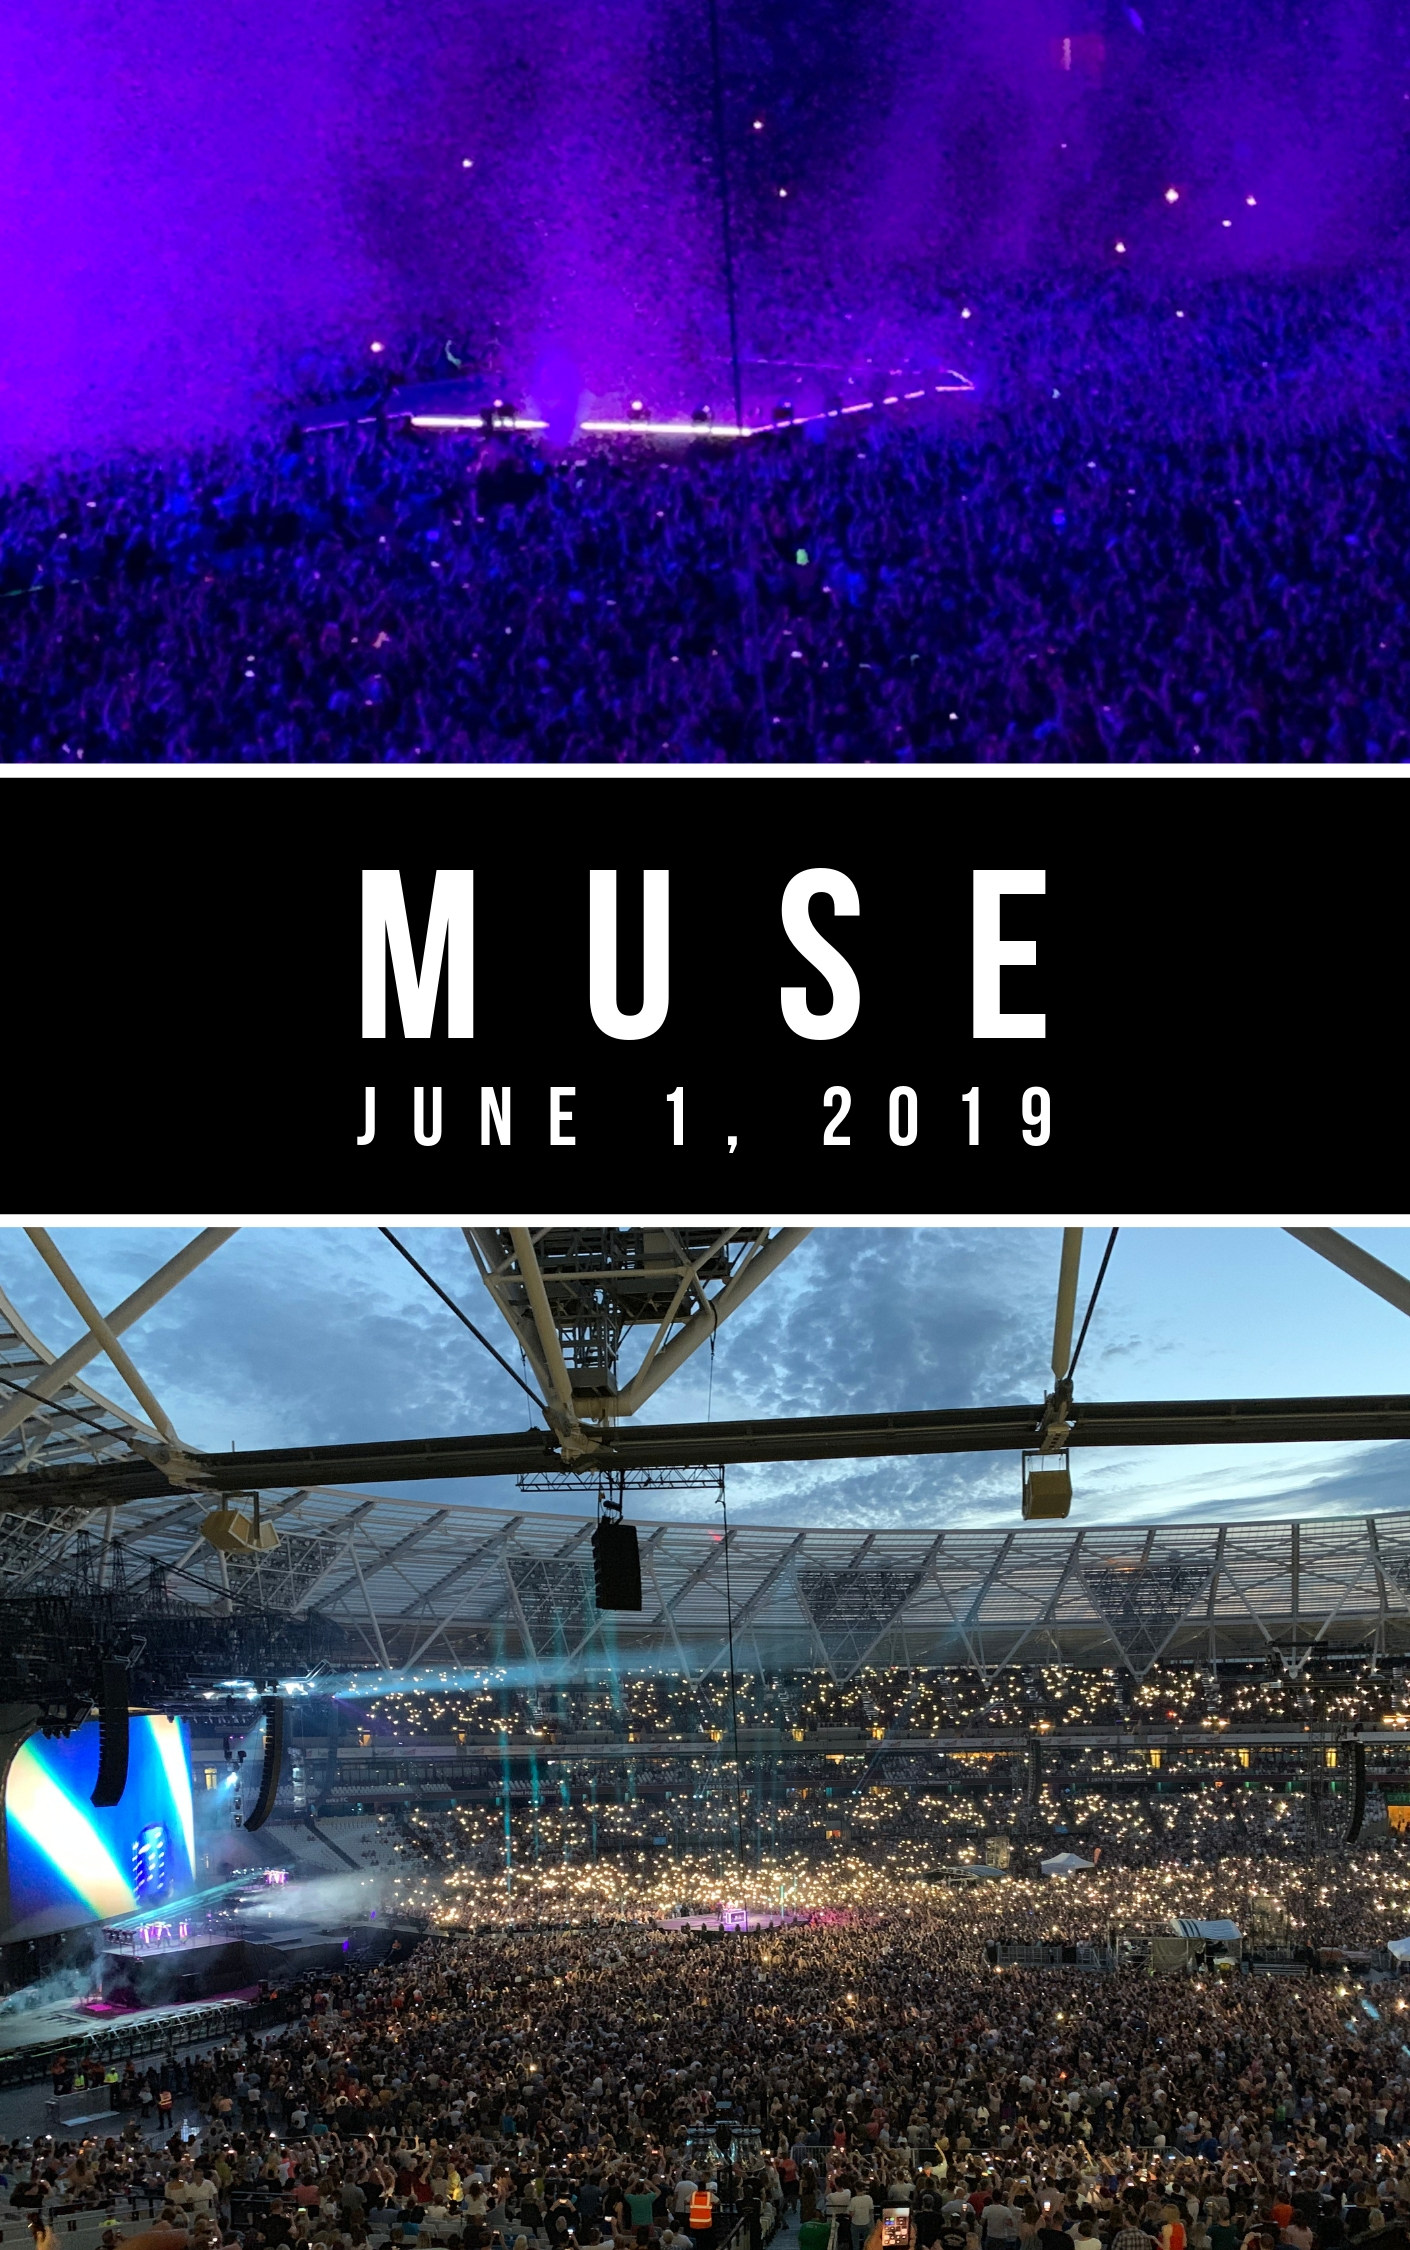 Muse 1 June 2019, RJ Scott MM, USA Today Bestselling MM Gay Romance Author